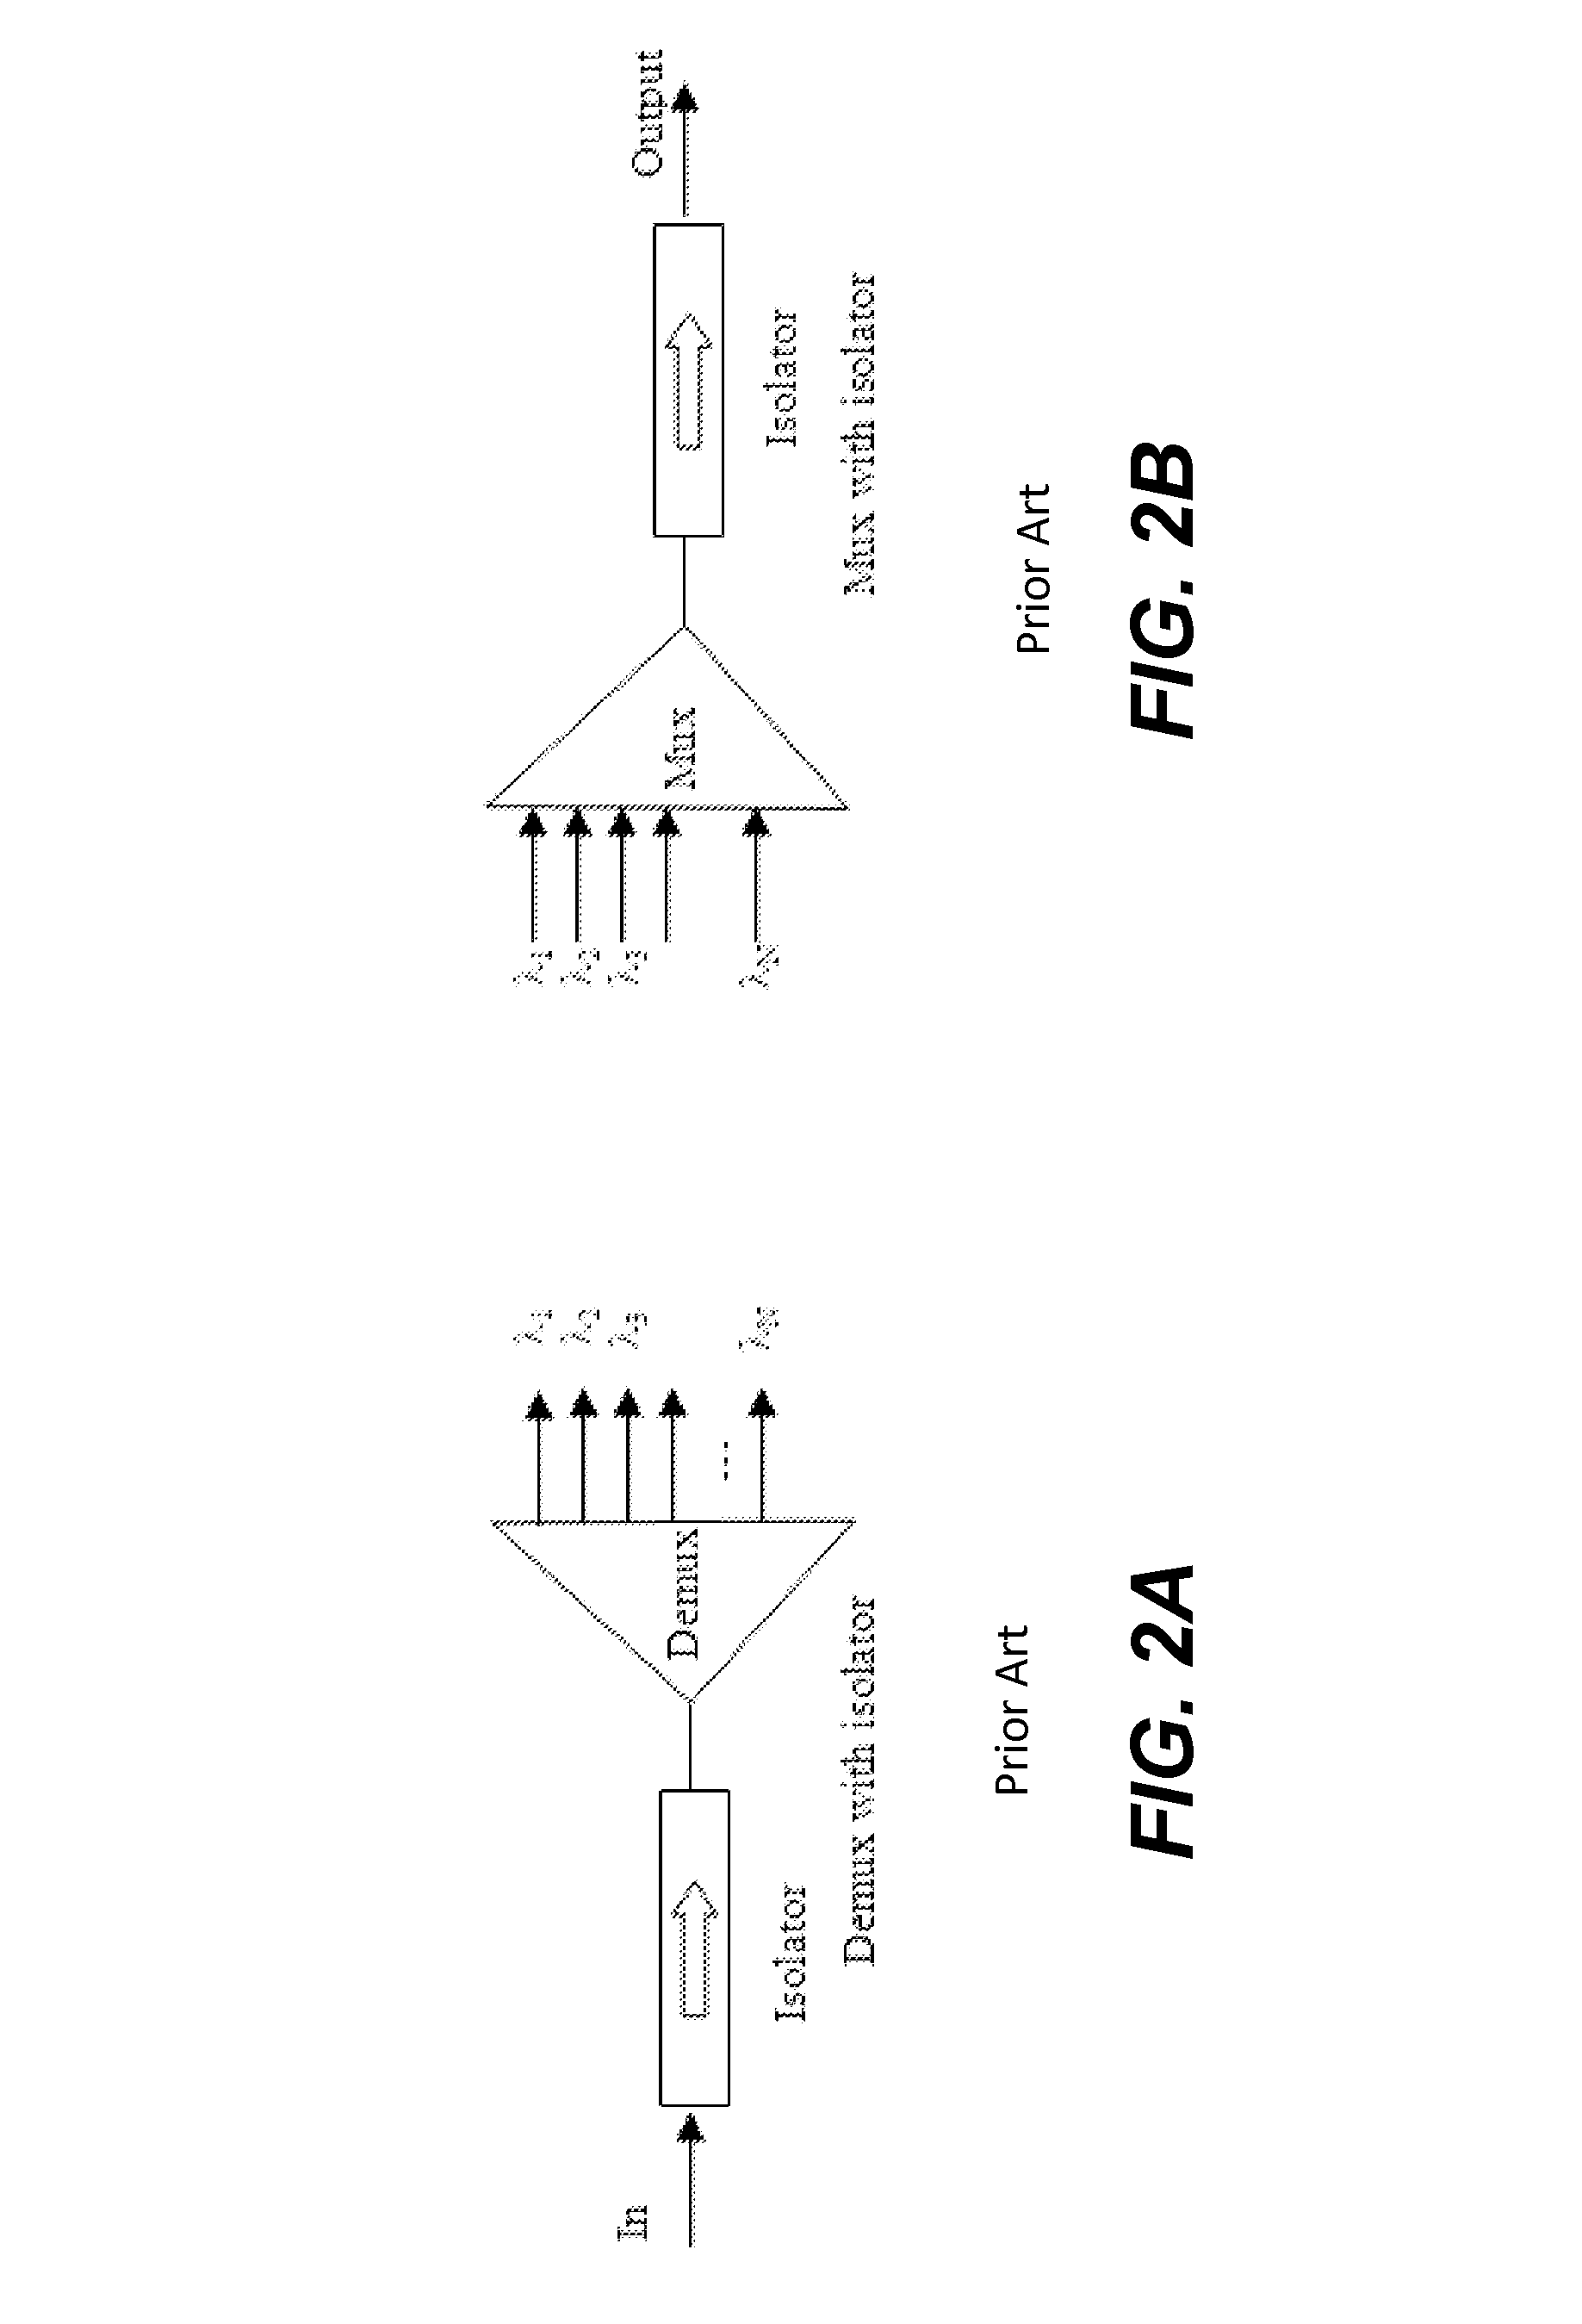 Optical devices with built-in isolators